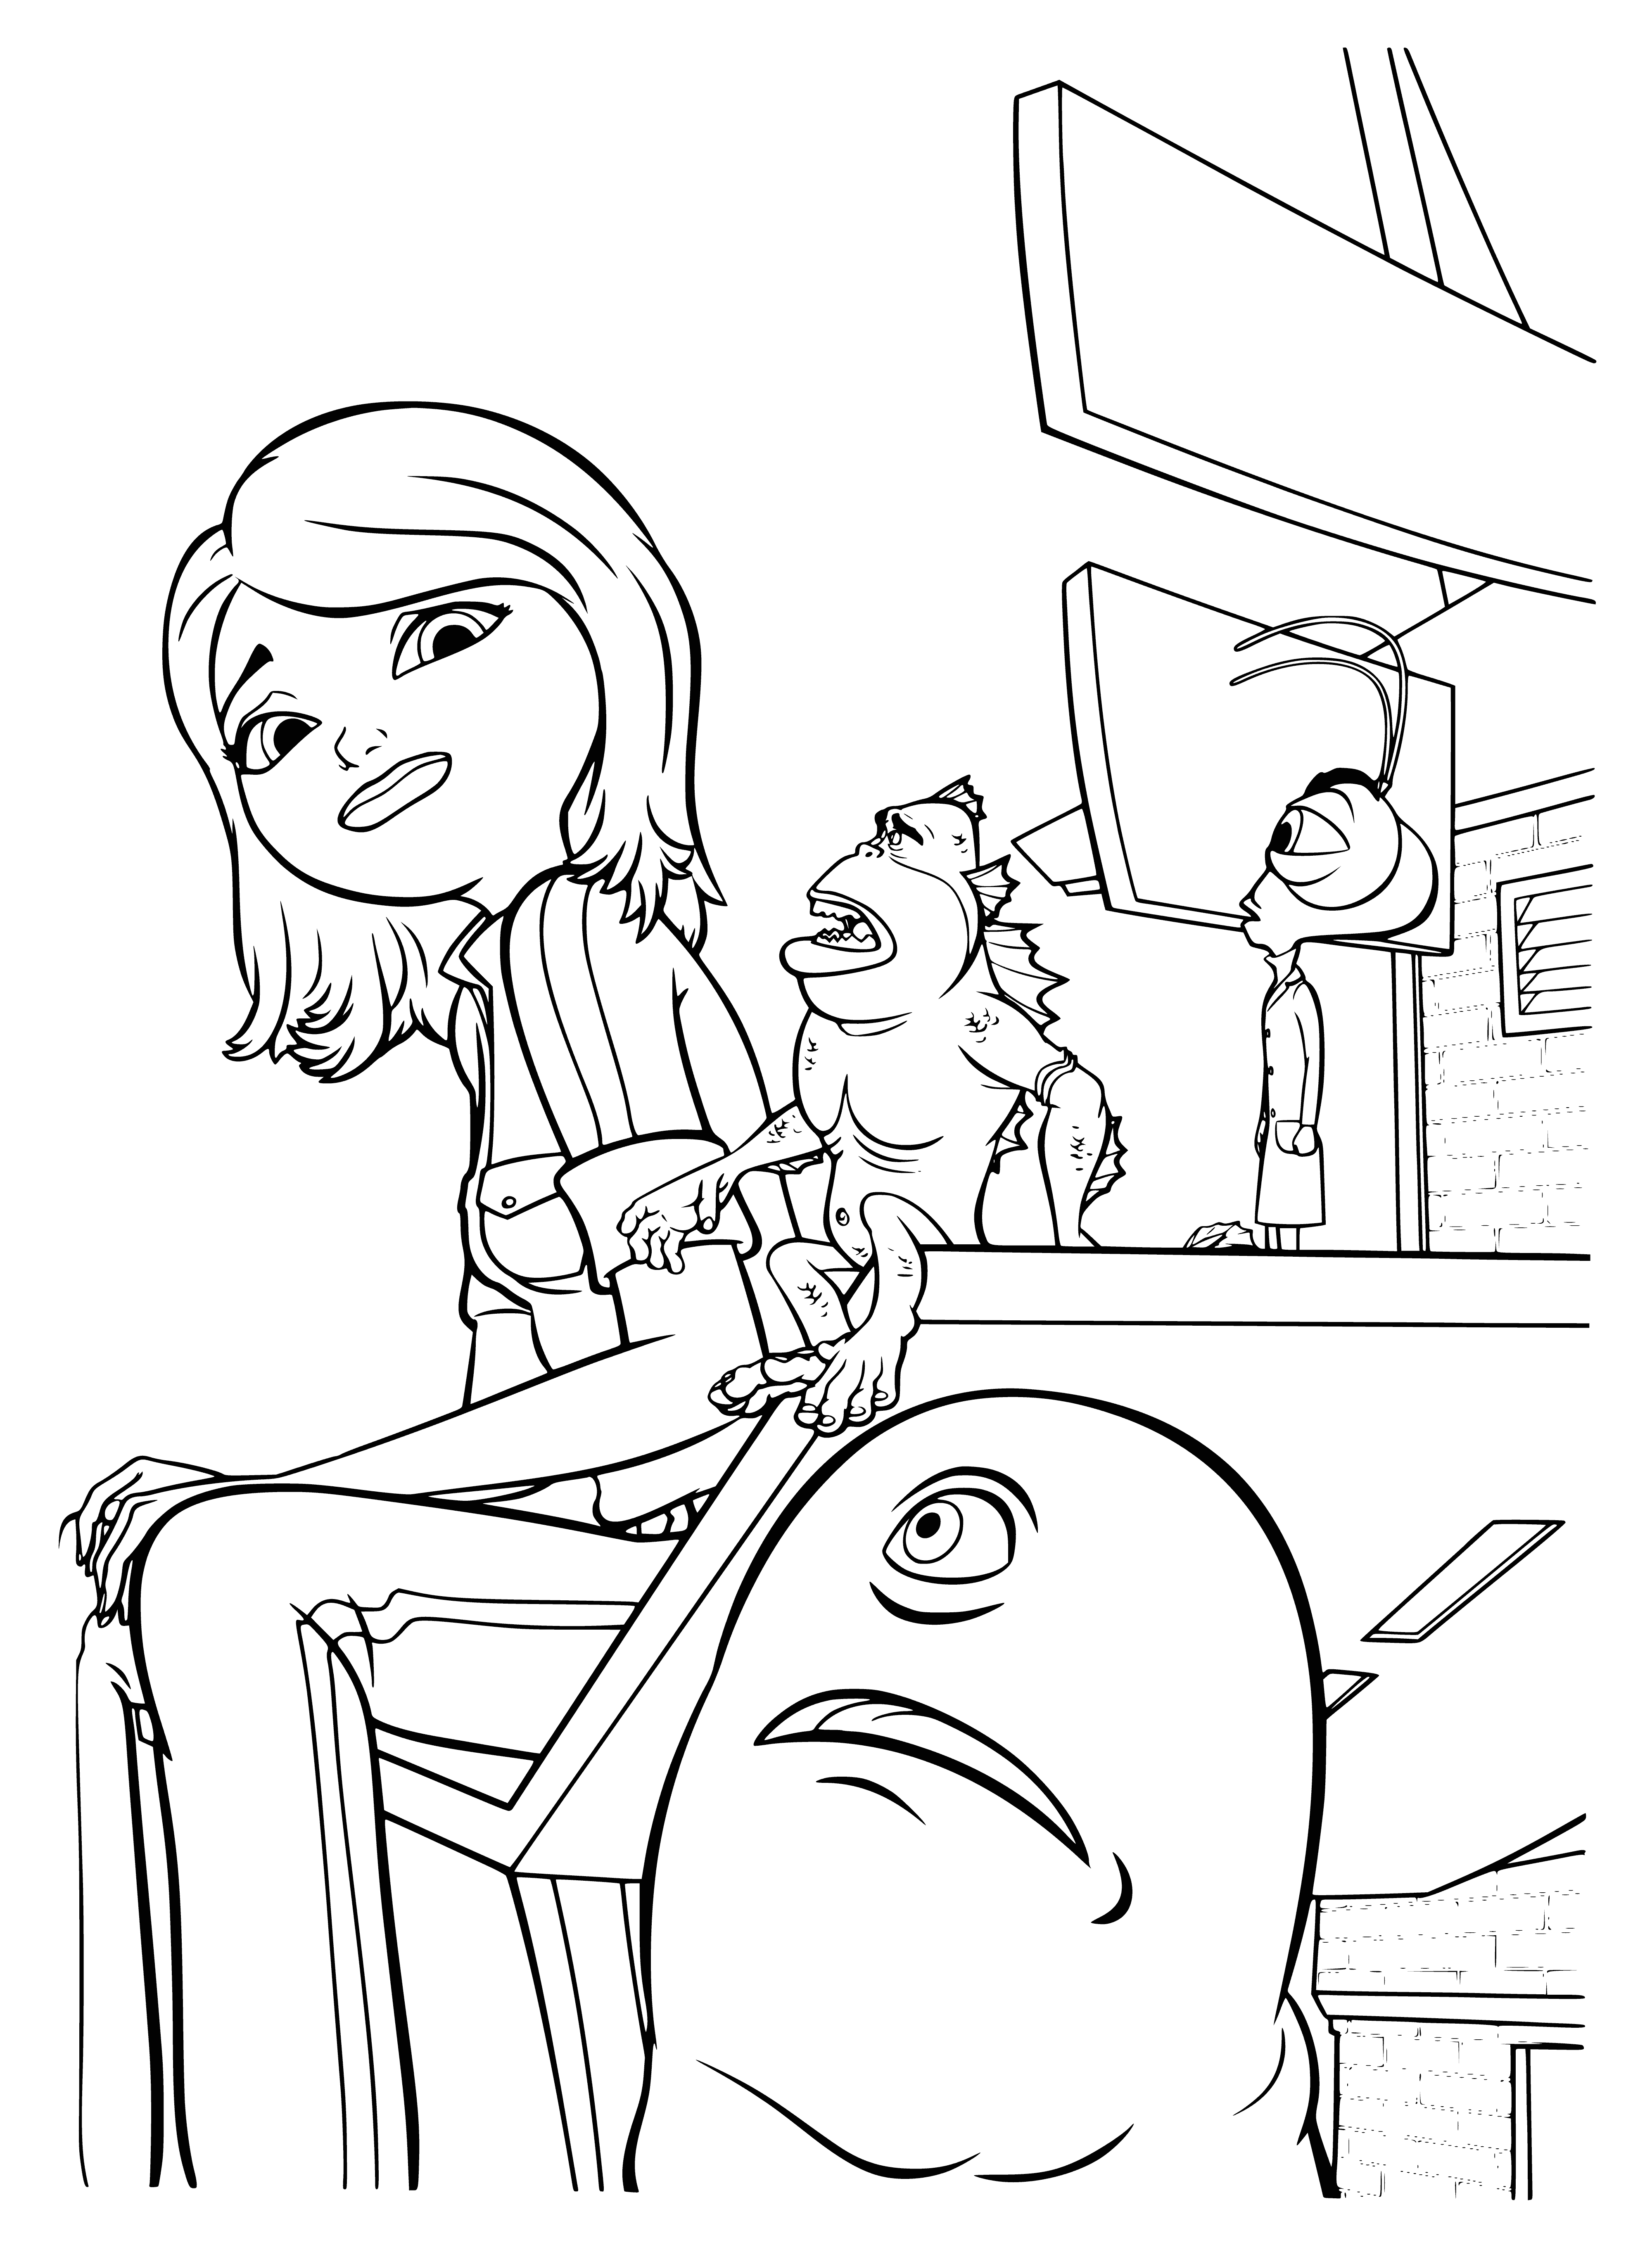 Friends console coloring page